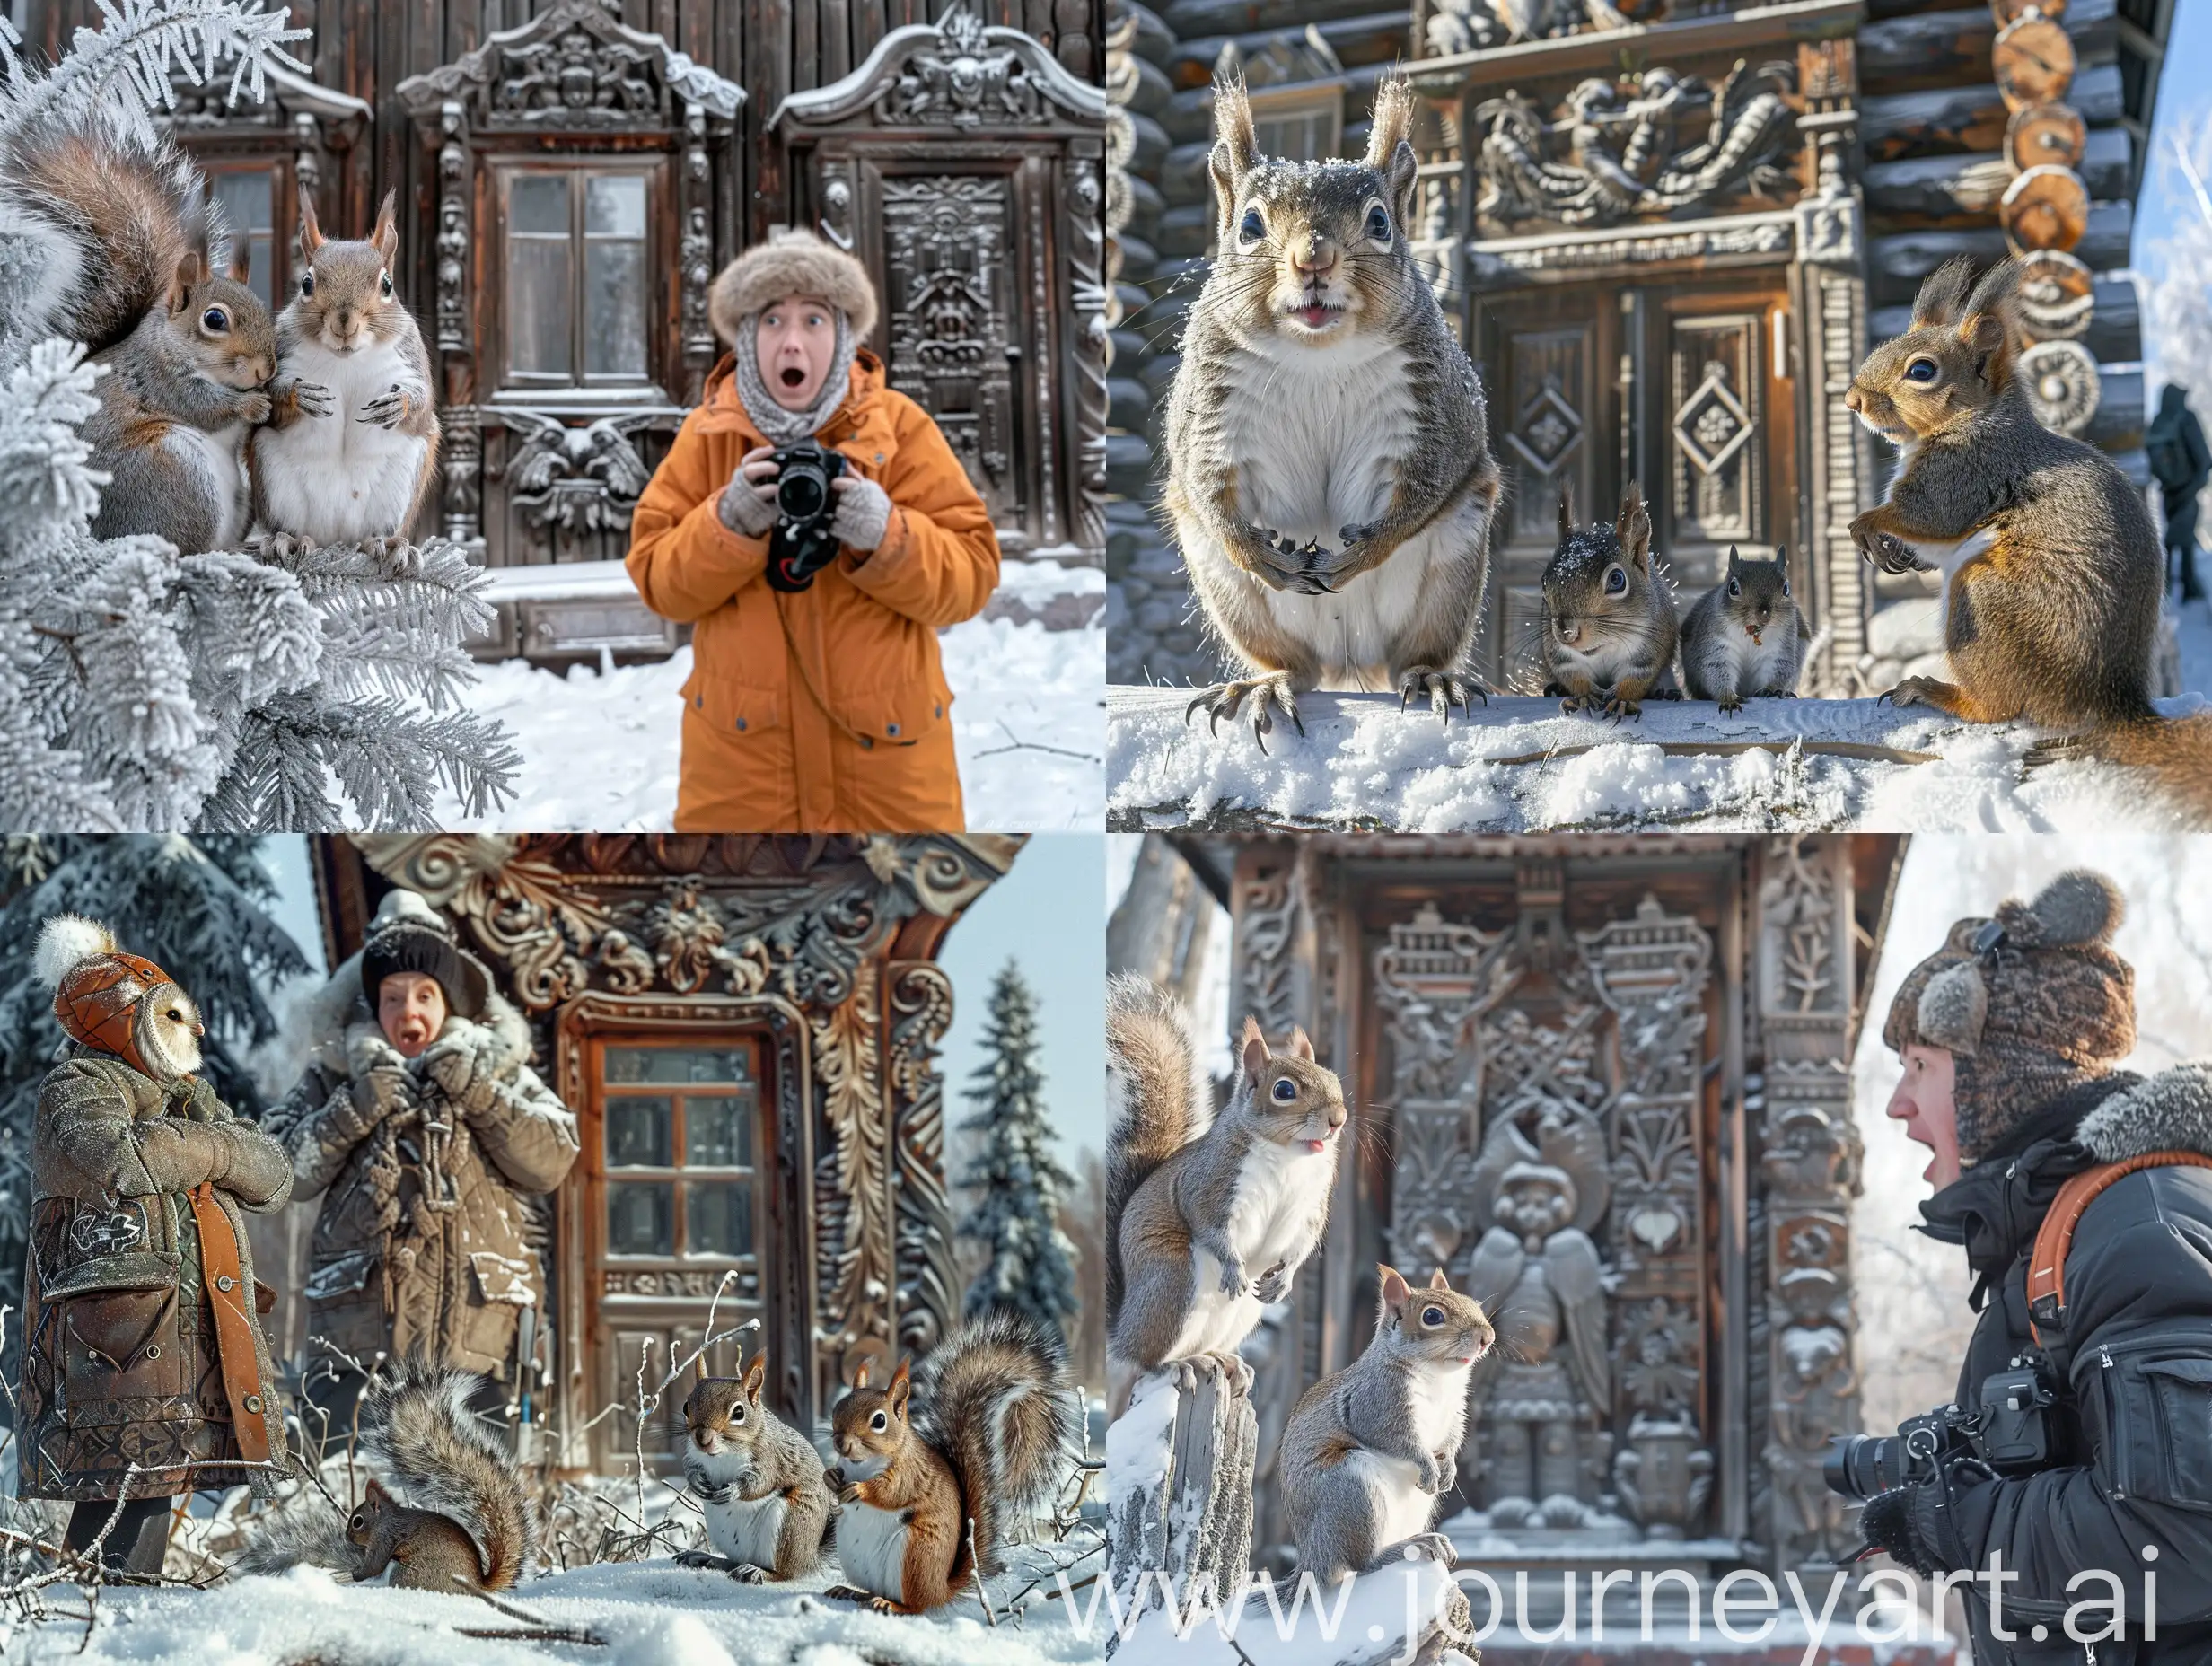 Surprised-Photographer-Captures-Siberian-Wildlife-in-Front-of-Carved-Wooden-House